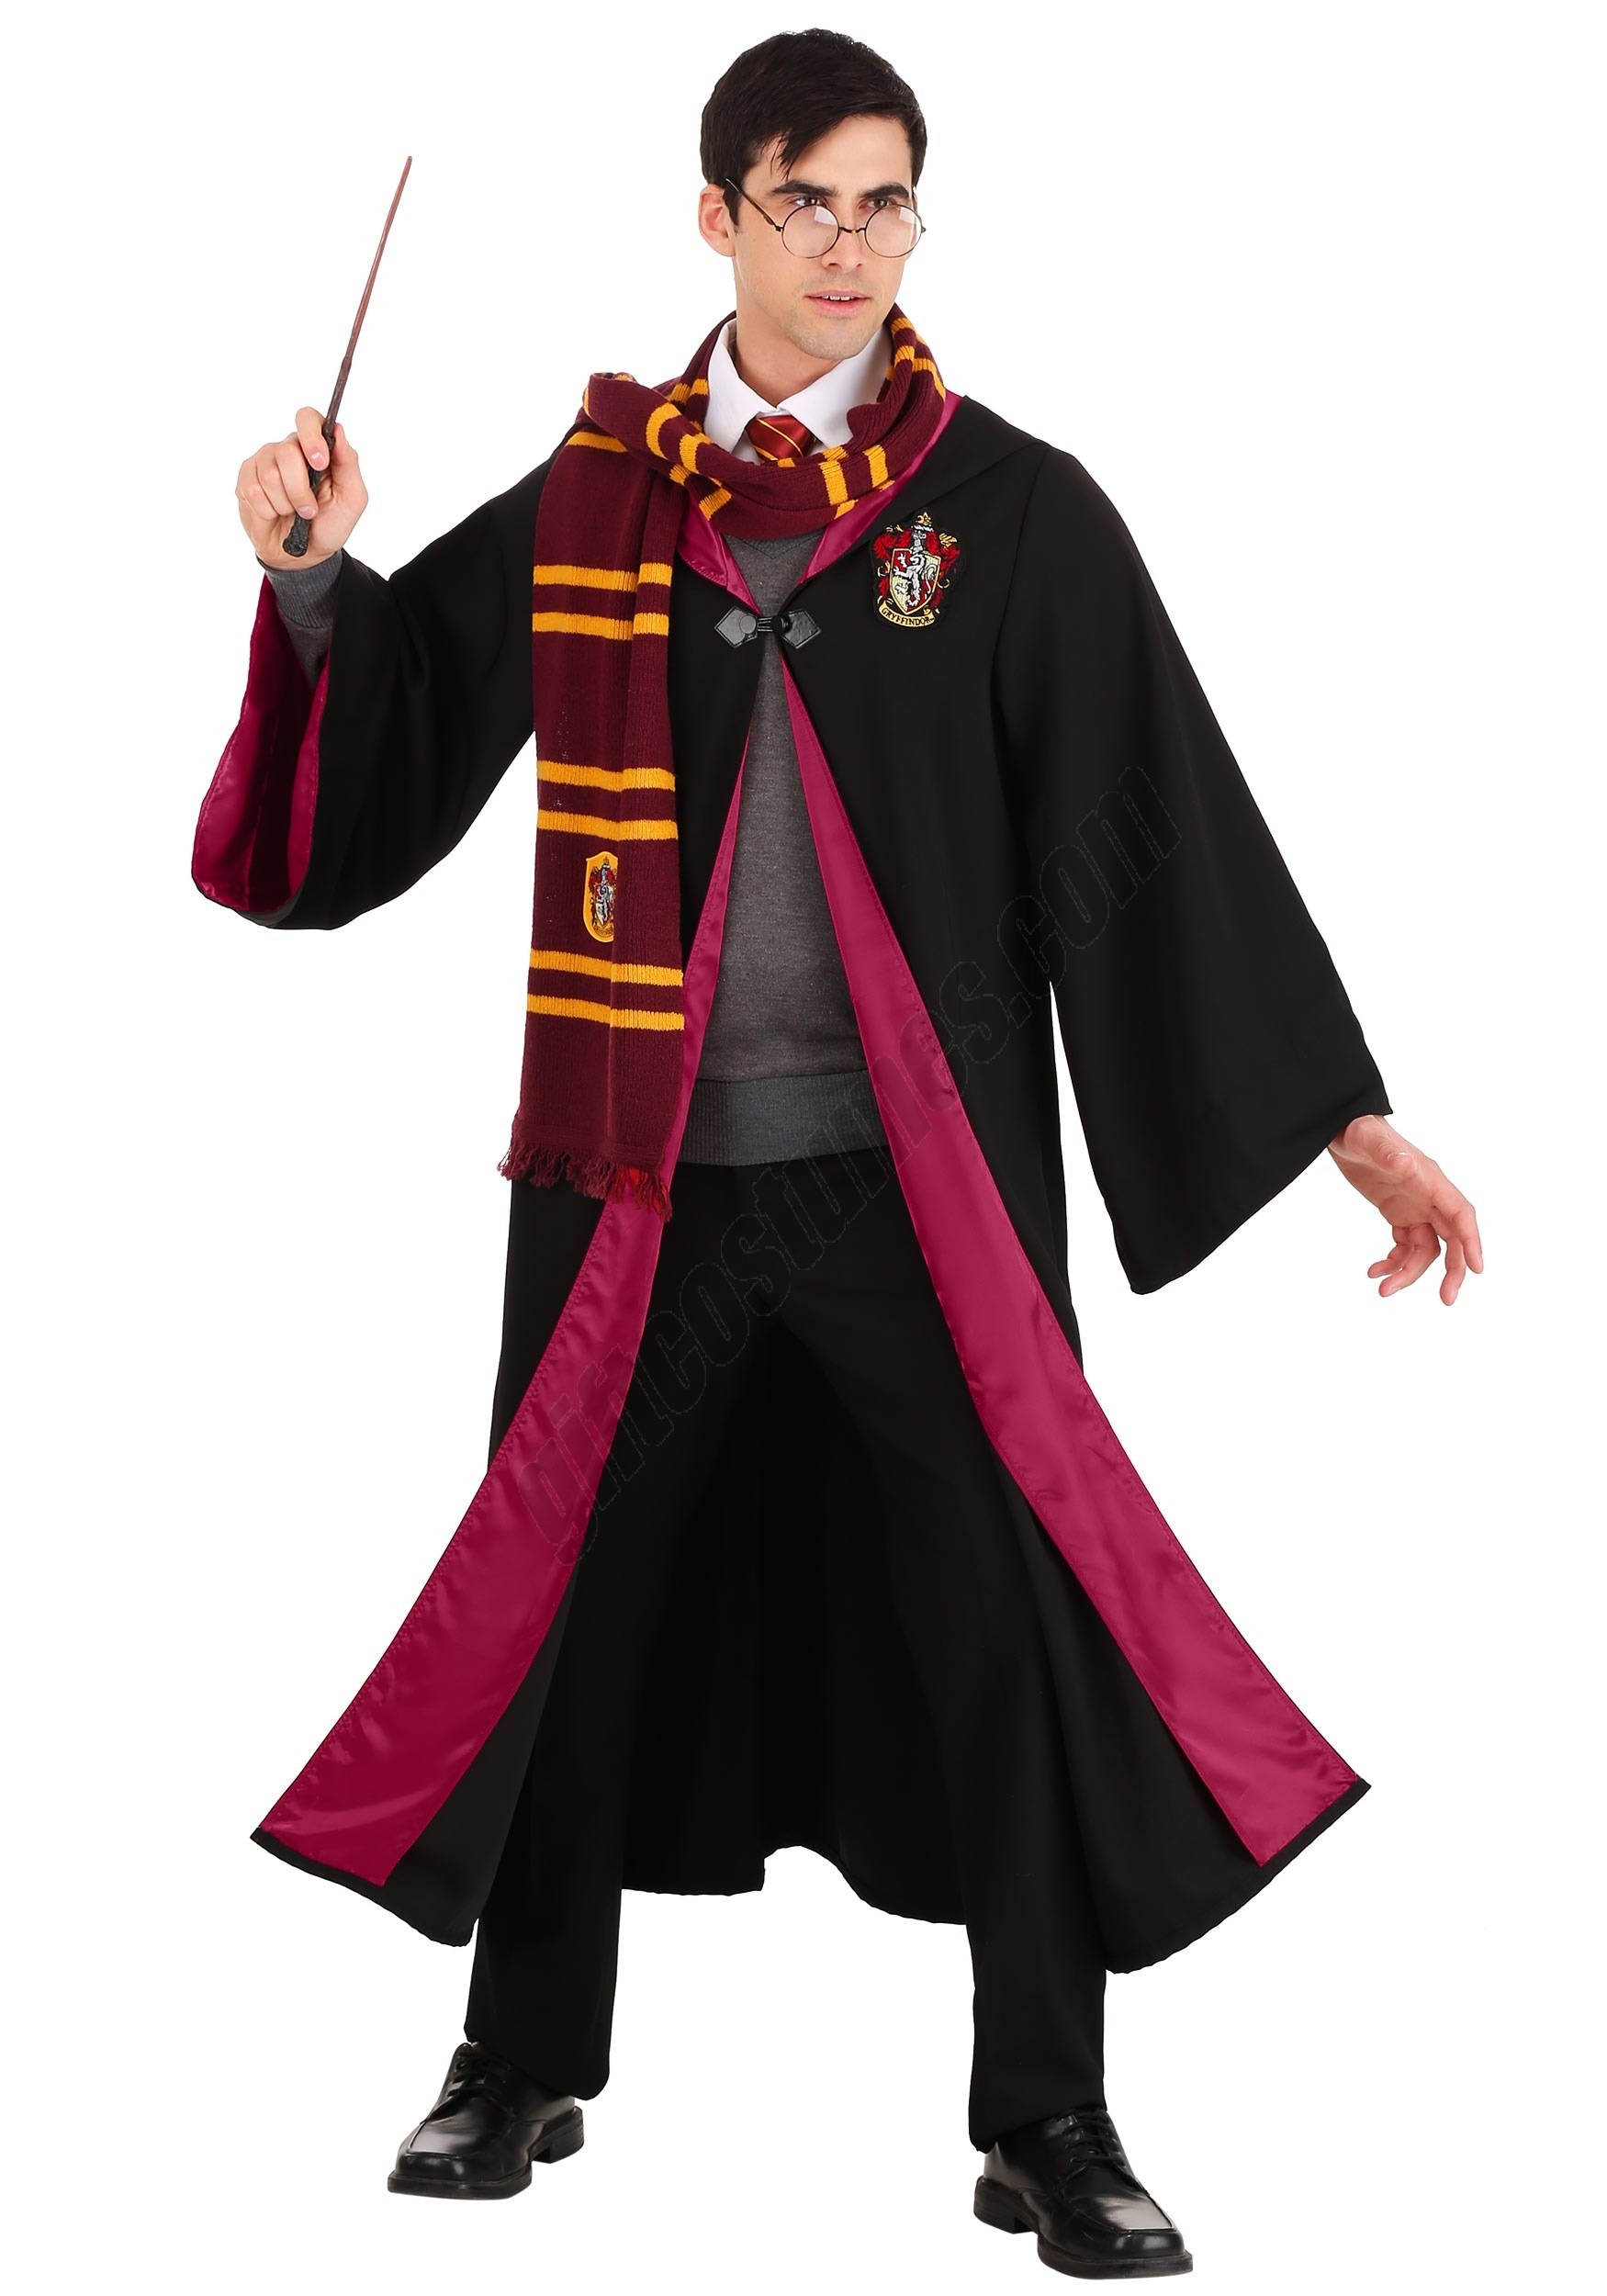 Deluxe Harry Potter Costume for Adults Promotions - Deluxe Harry Potter Costume for Adults Promotions